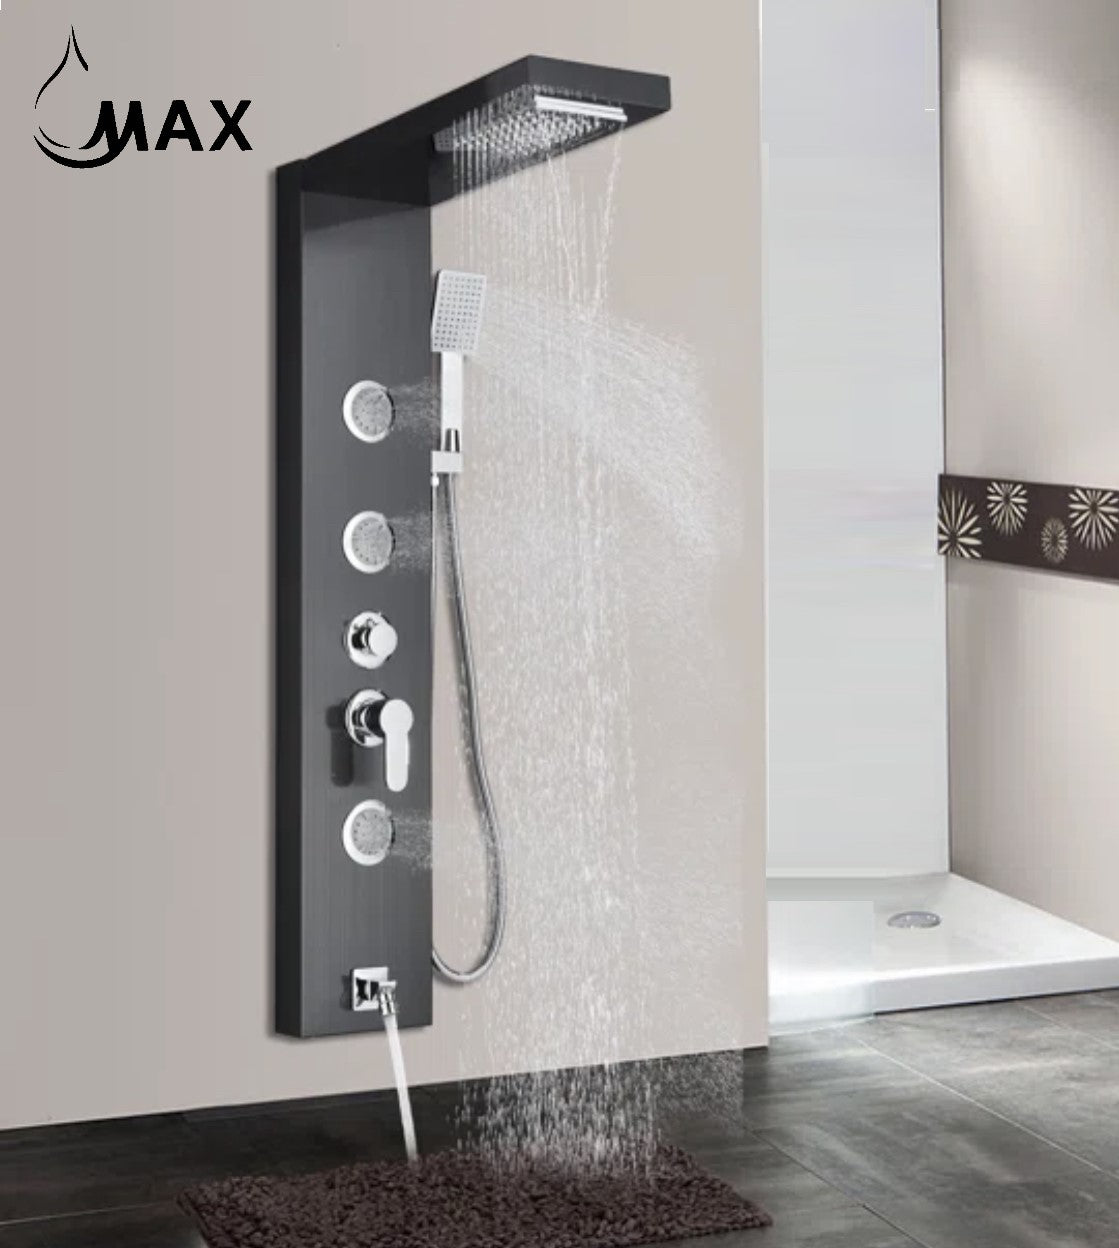 Rainfall Shower Panel System Five Functions with 3 Massage Jets and Handheld Black Finish